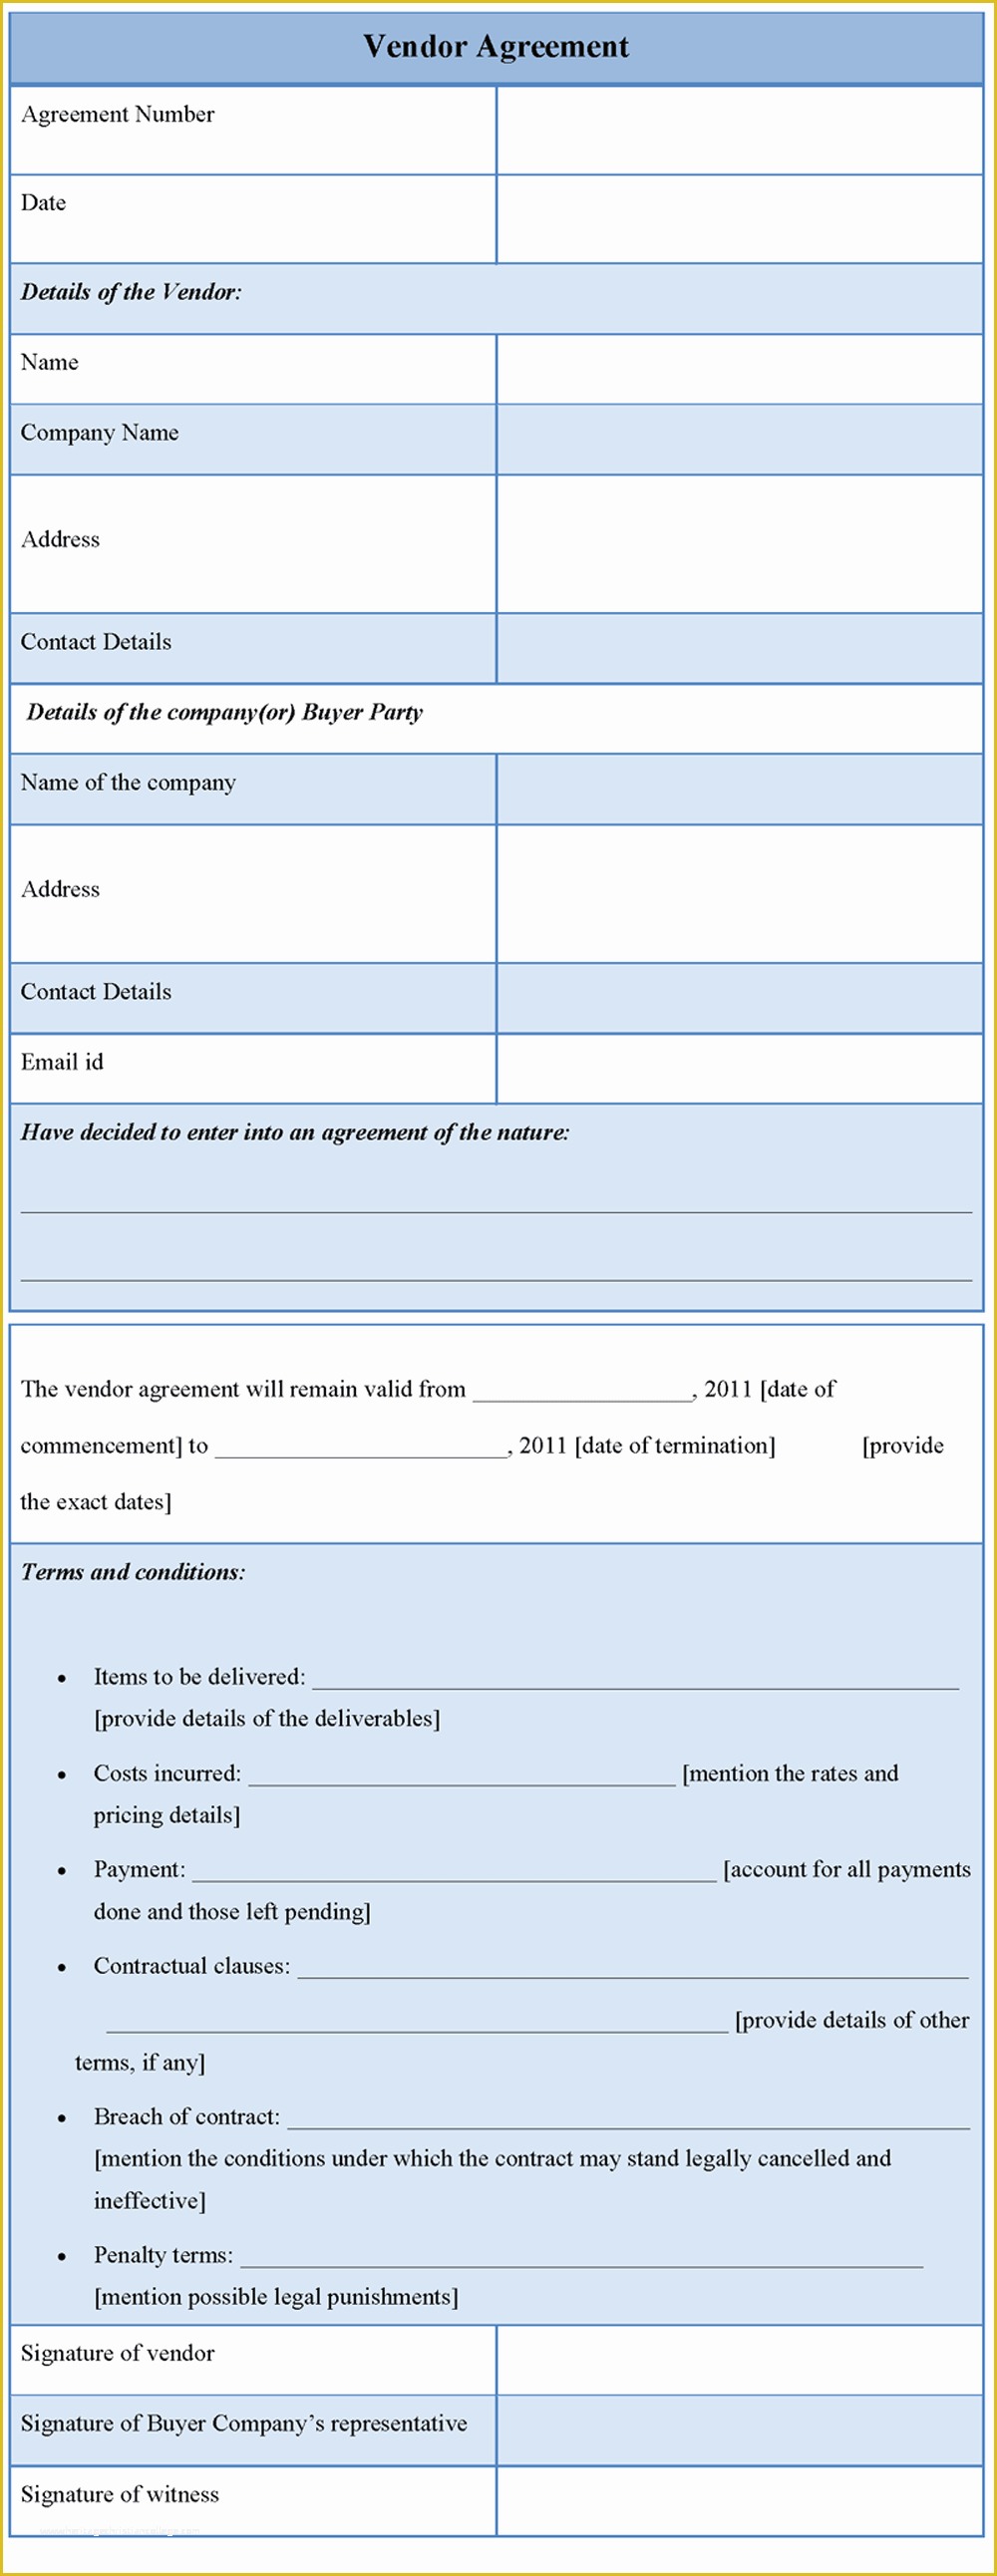 Free Vendor Contract Template Of 9 Best Of Sample Vendor Agreement forms Vendor